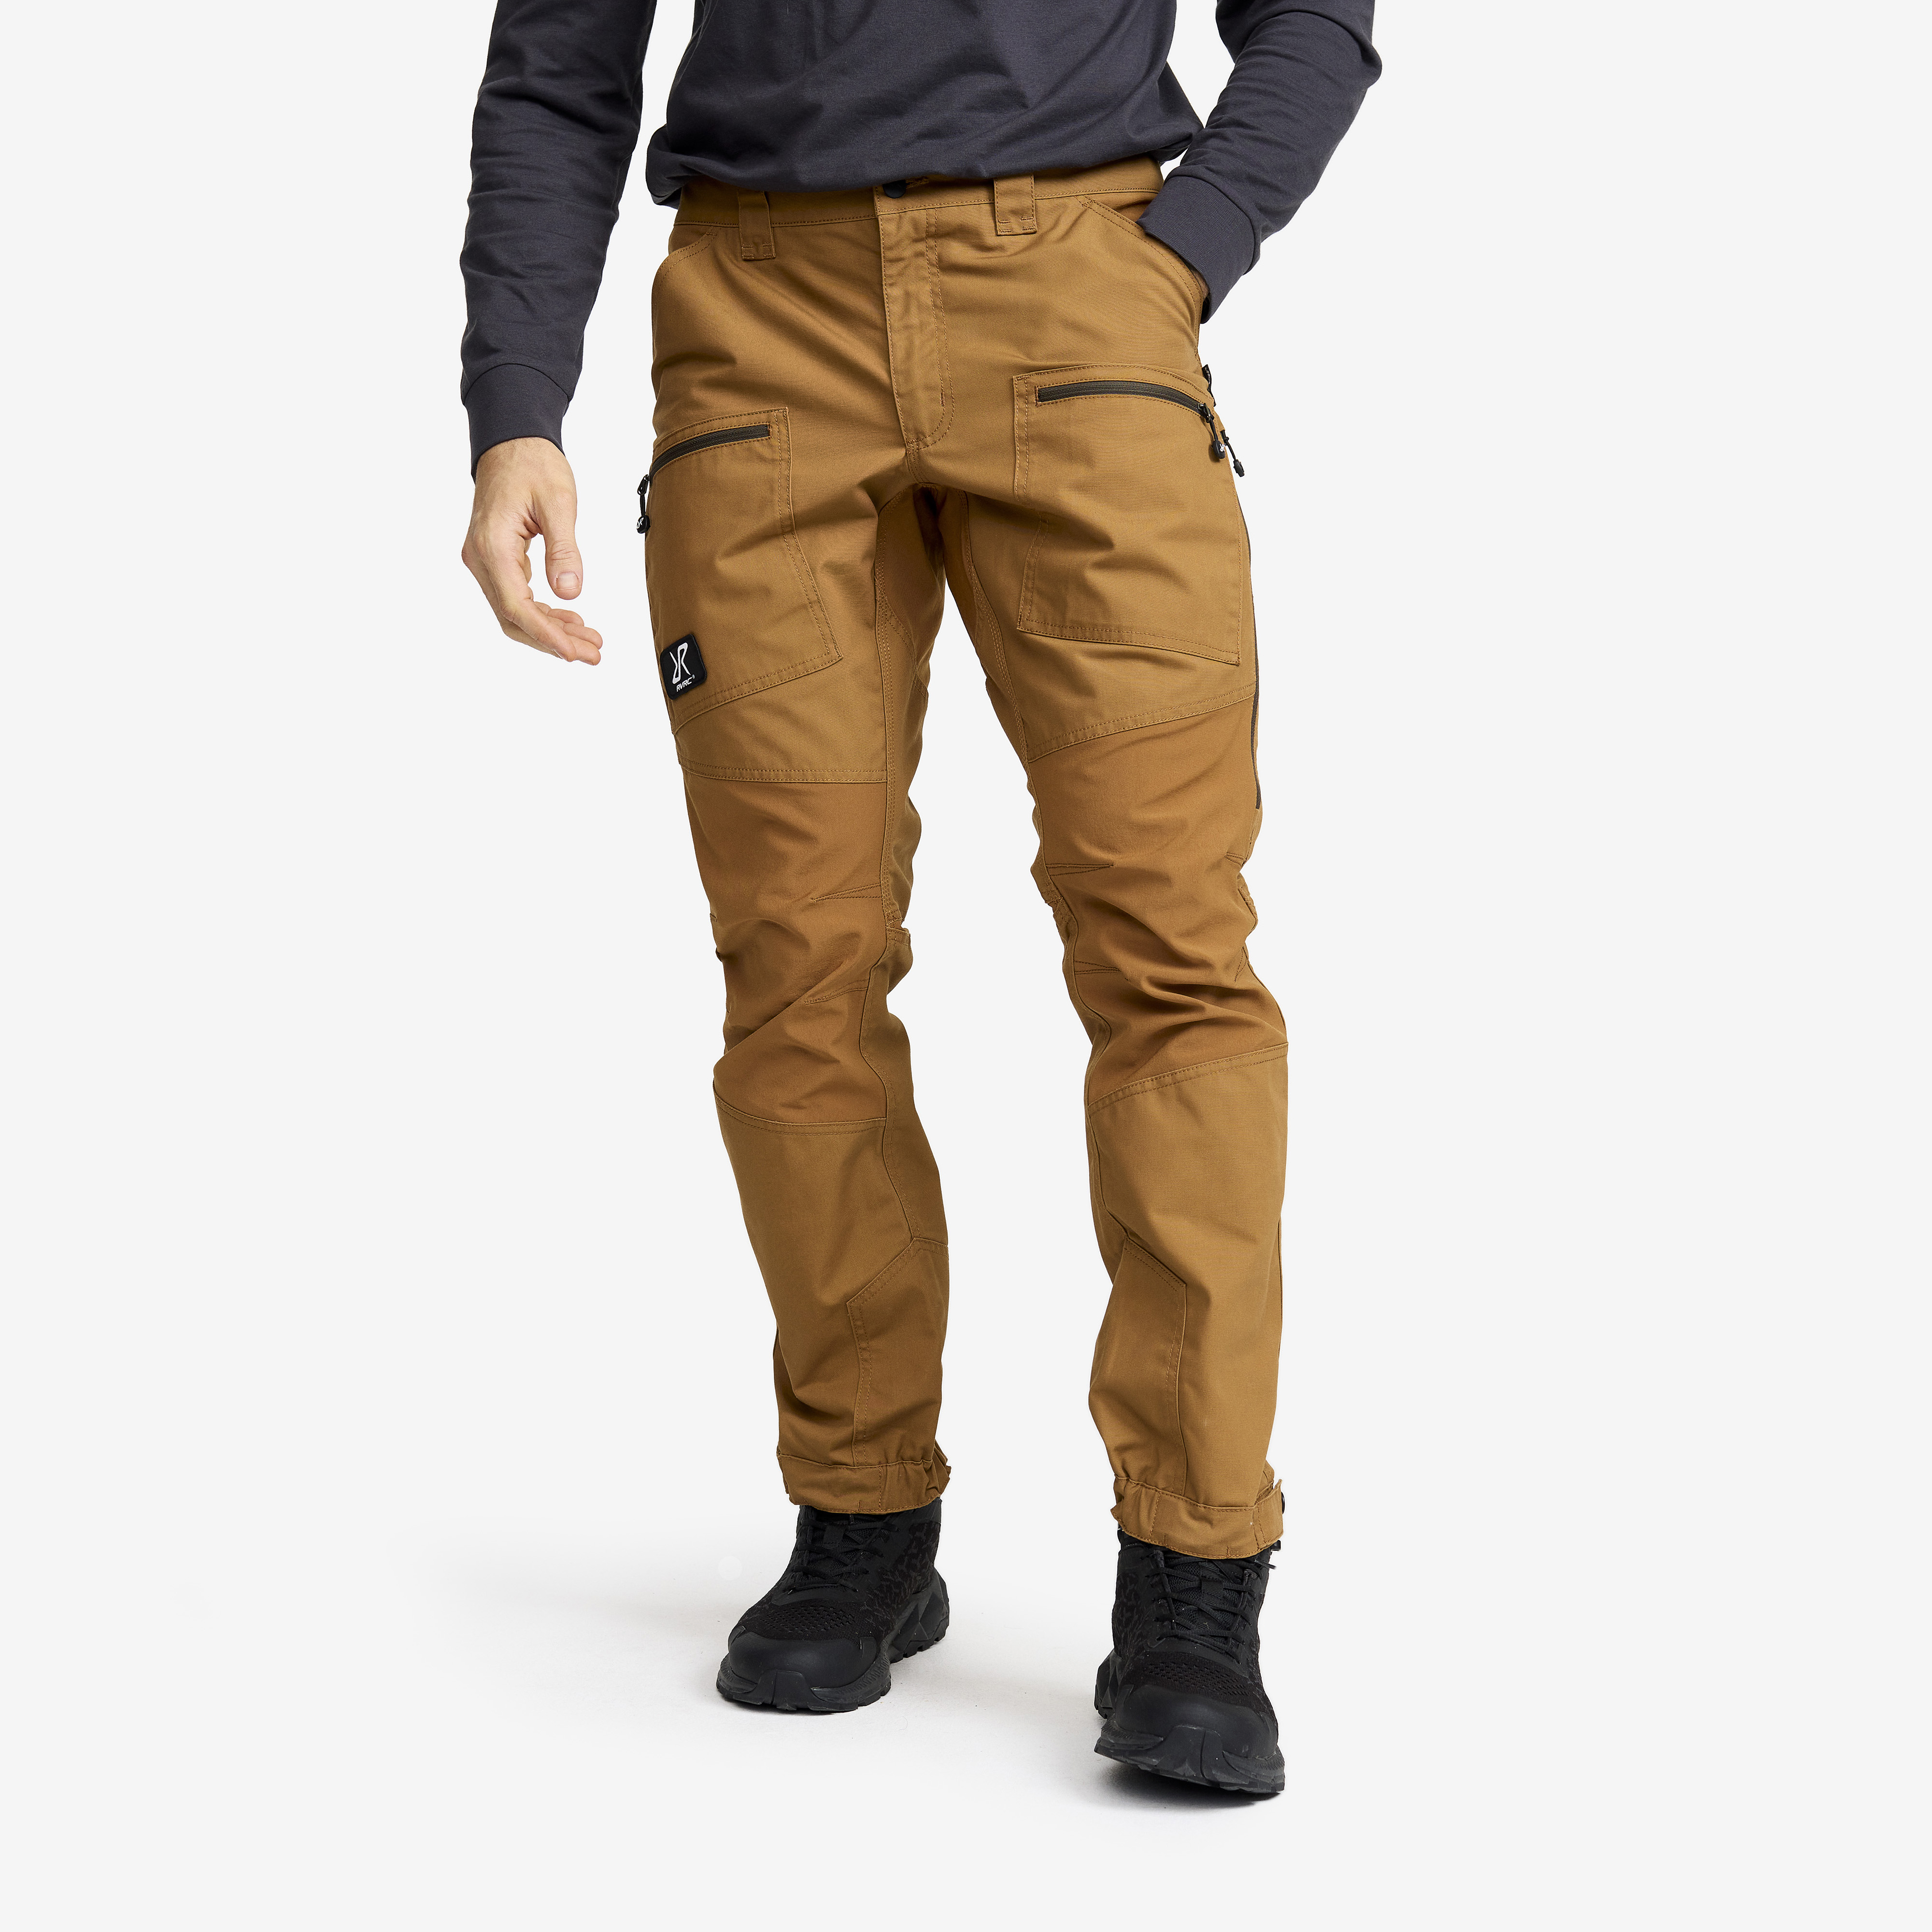 Nordwand Pro Pants Rubber Herr